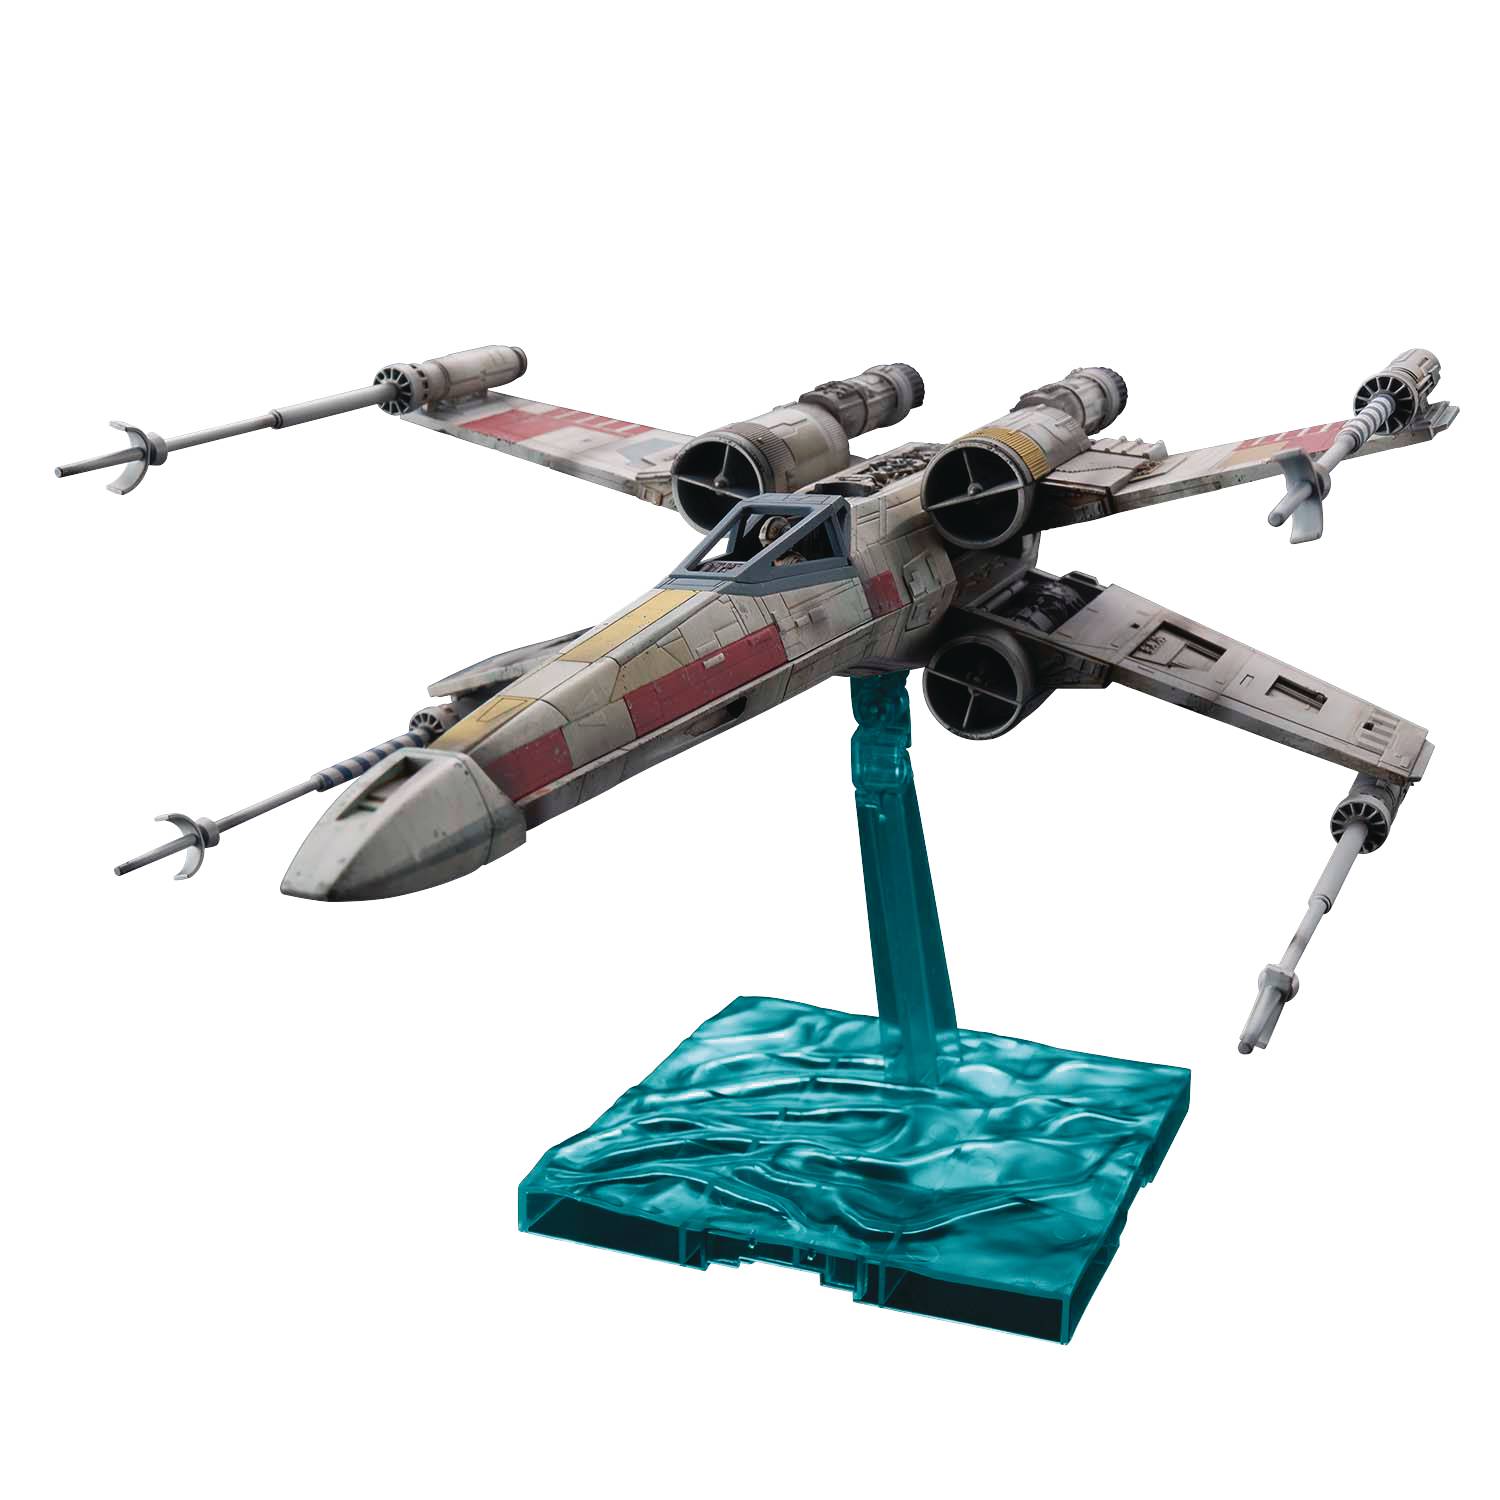 STAR WARS X-WING STARFIGHTER RED5 RISE OF SKYWALKER MDL KIT